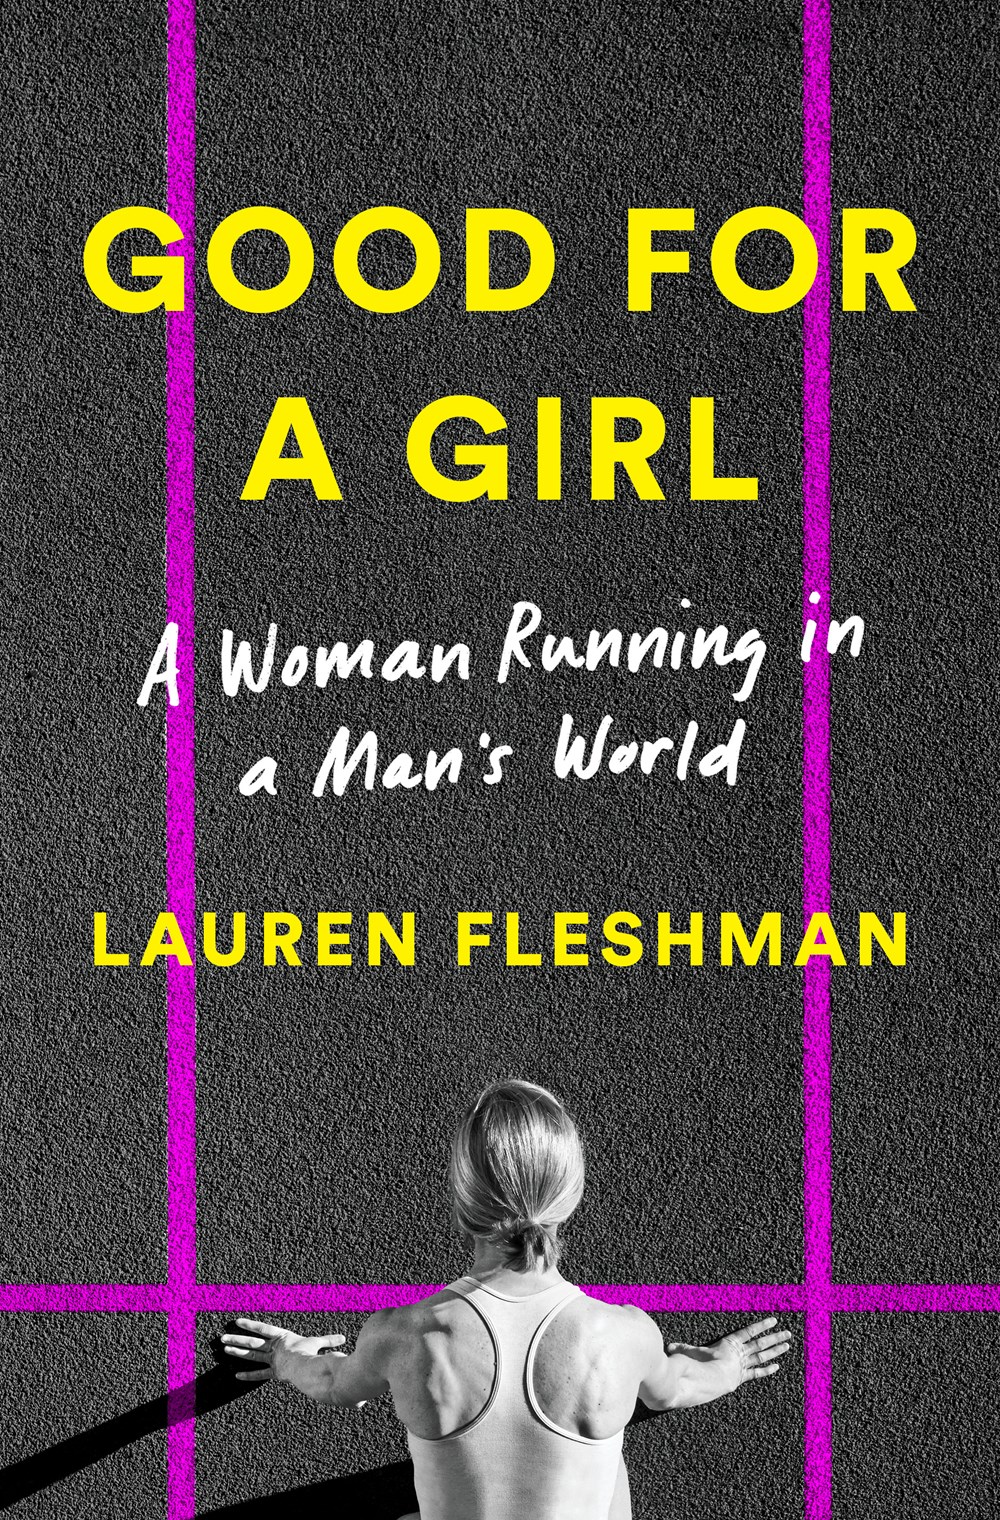 Image of "Good for a Girl: A Woman Running in a Man's World"